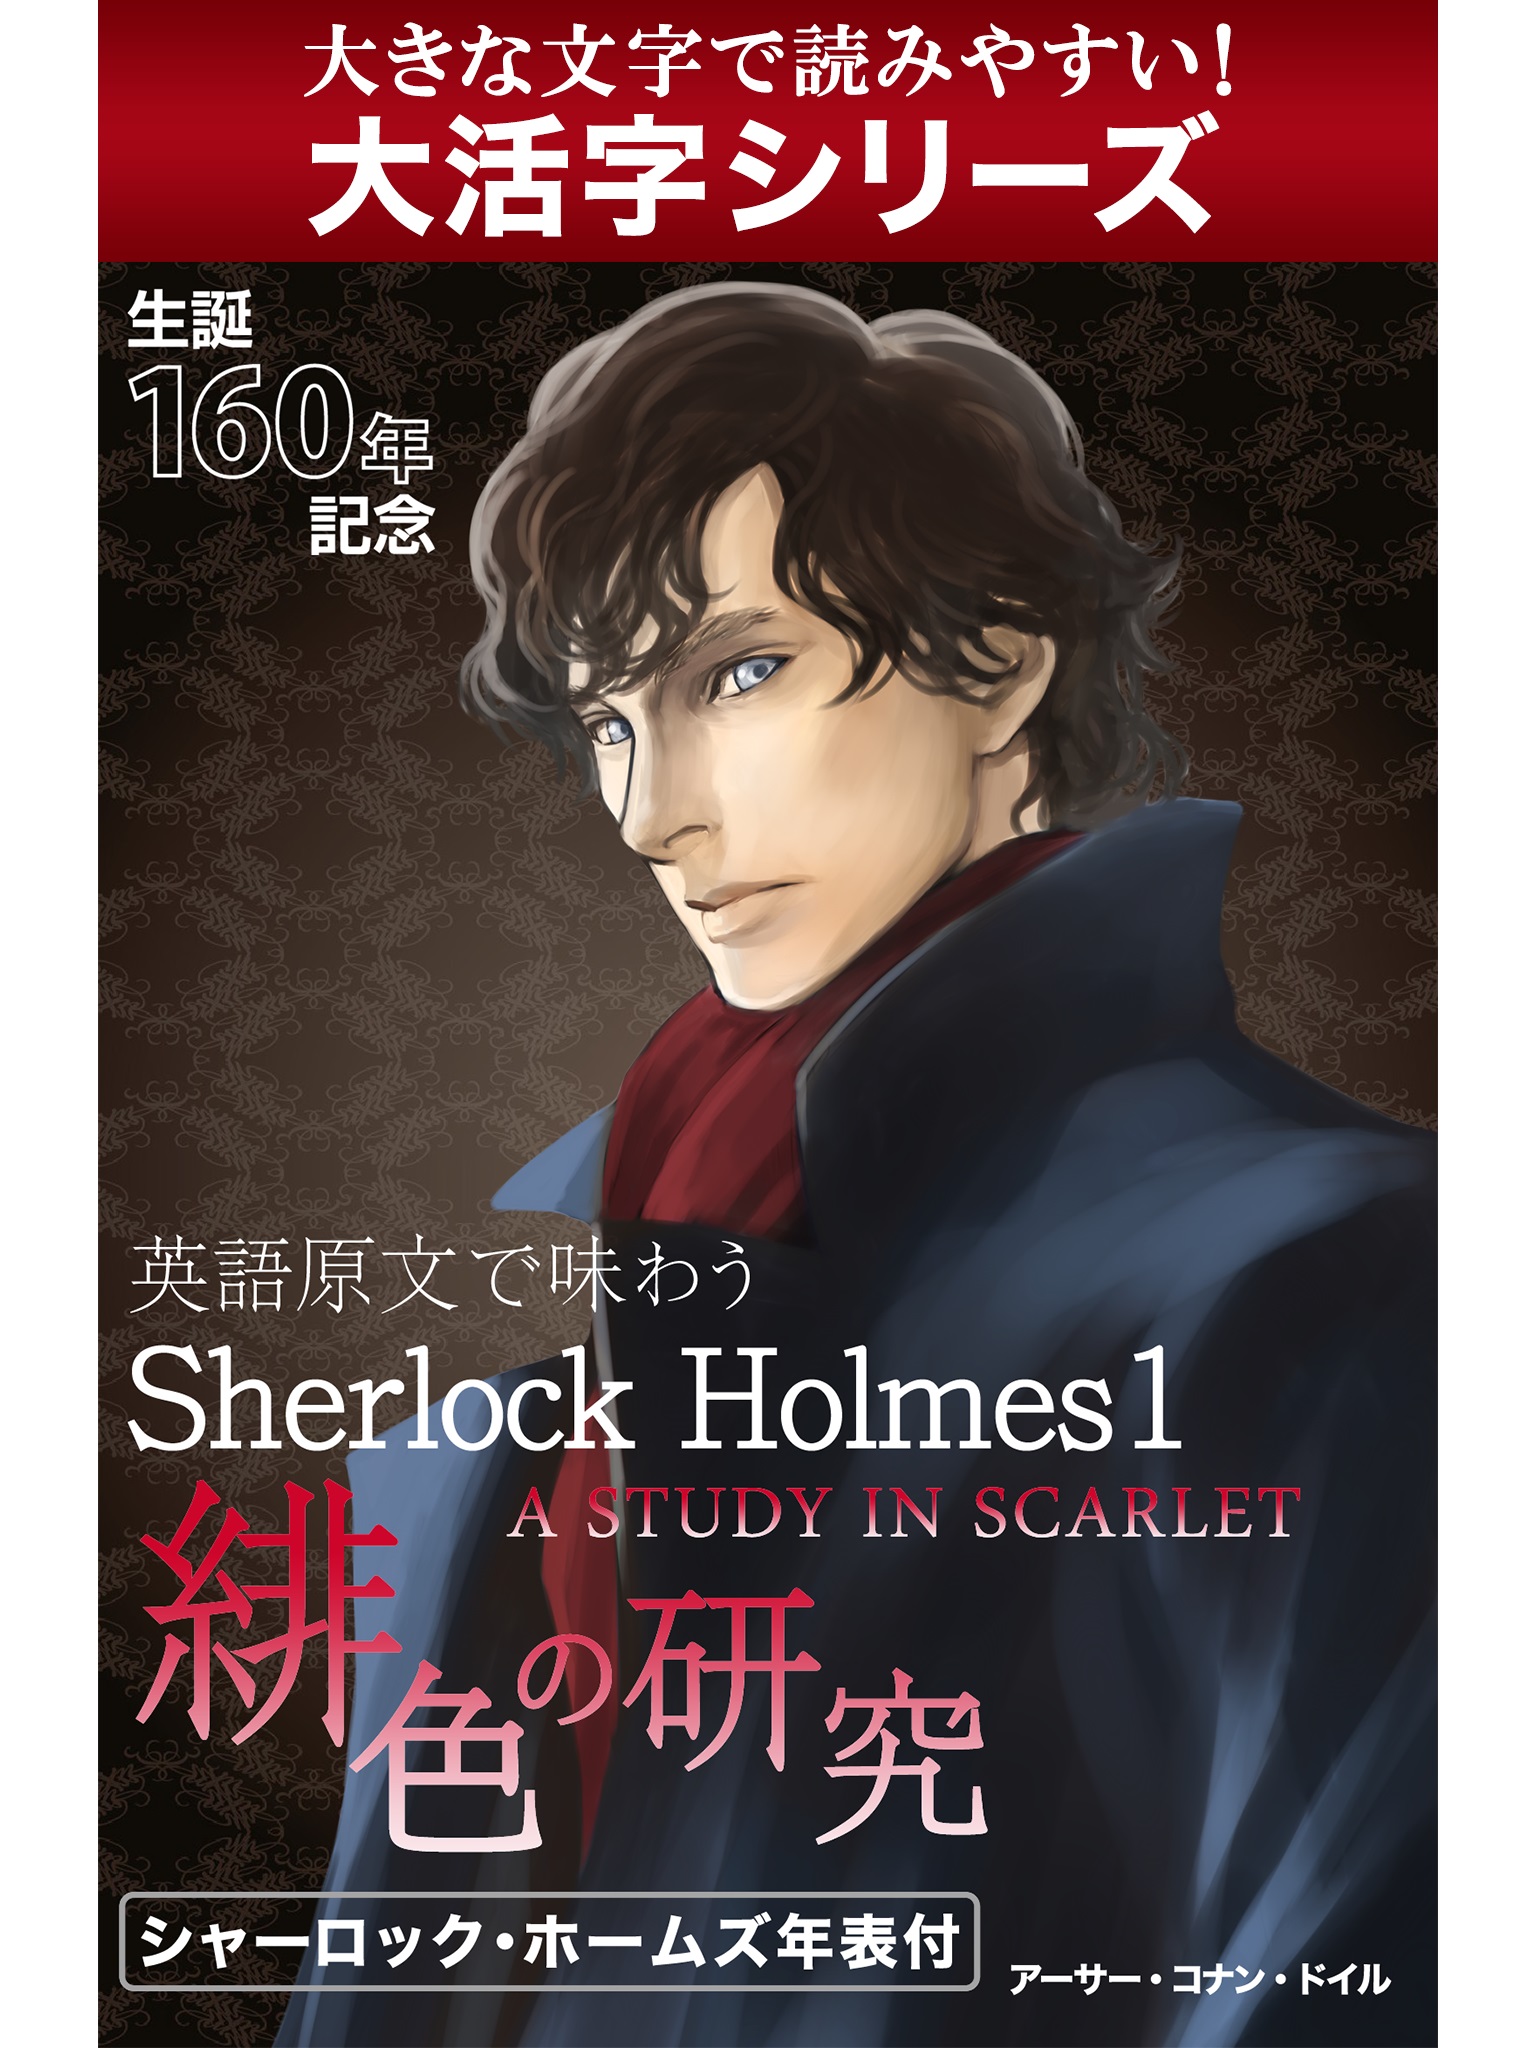 【android/kindle端末対応 大活字シリーズ】英語原文で味わうSherlock Holmes１　緋色の研究／A STUDY IN SCARLET.